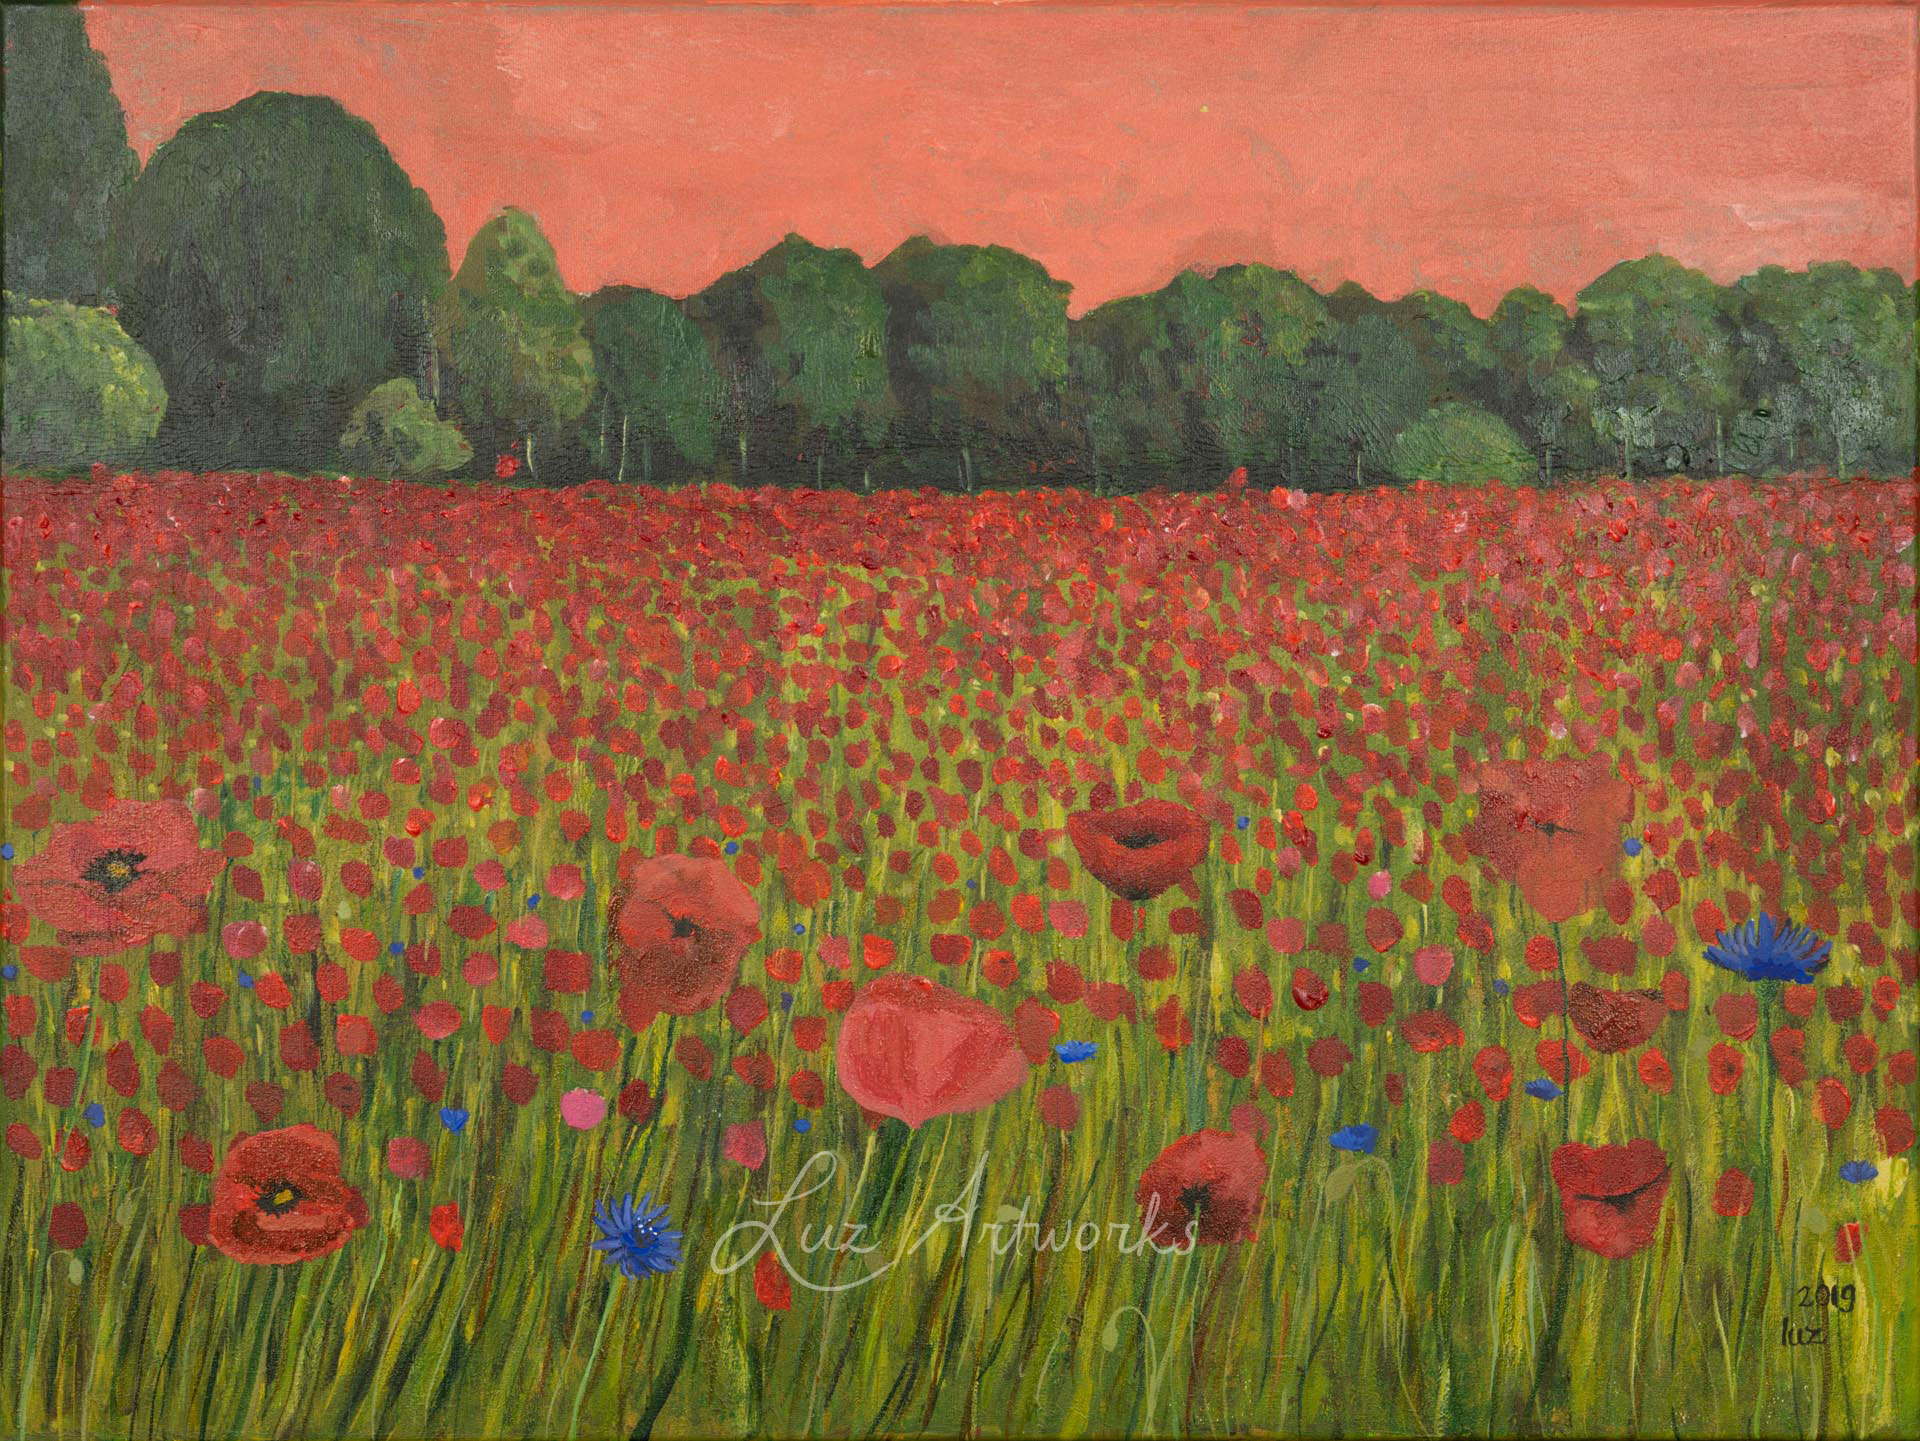 This image shows the painting  Poppy and cornflower field by Luz/Marloes Bloedjes